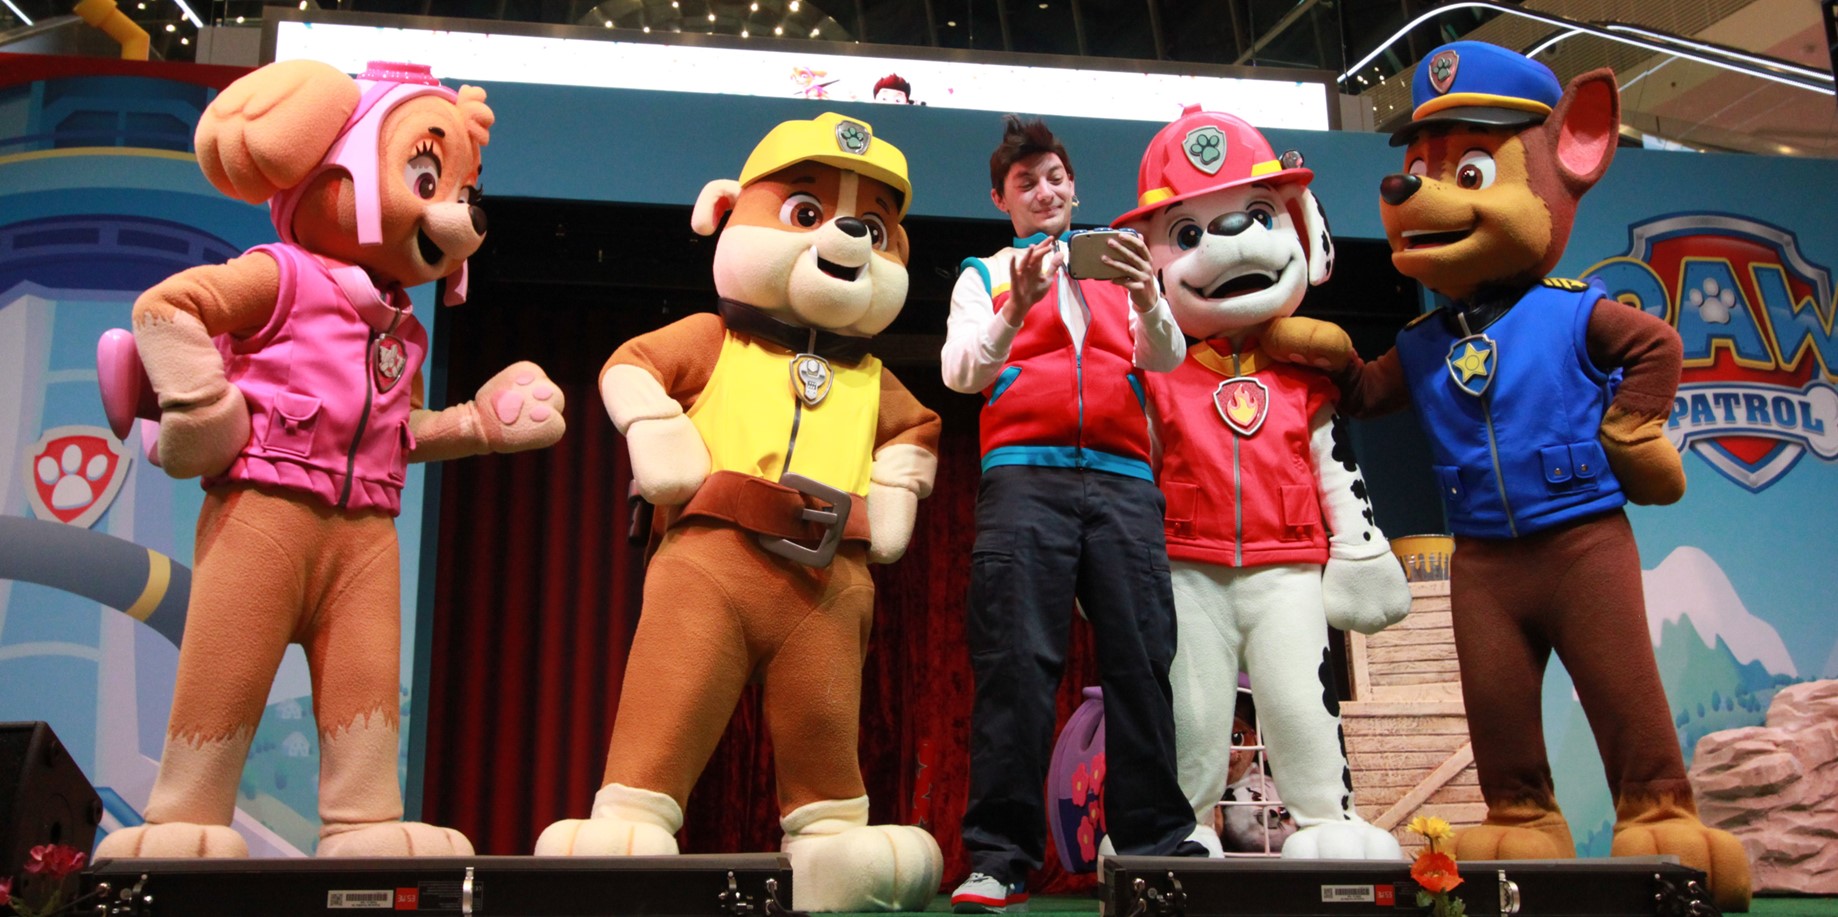 Join Nickelodeon’s PAW Patrol in 'The Big Show Rescue' Only at City Centre Mirdif